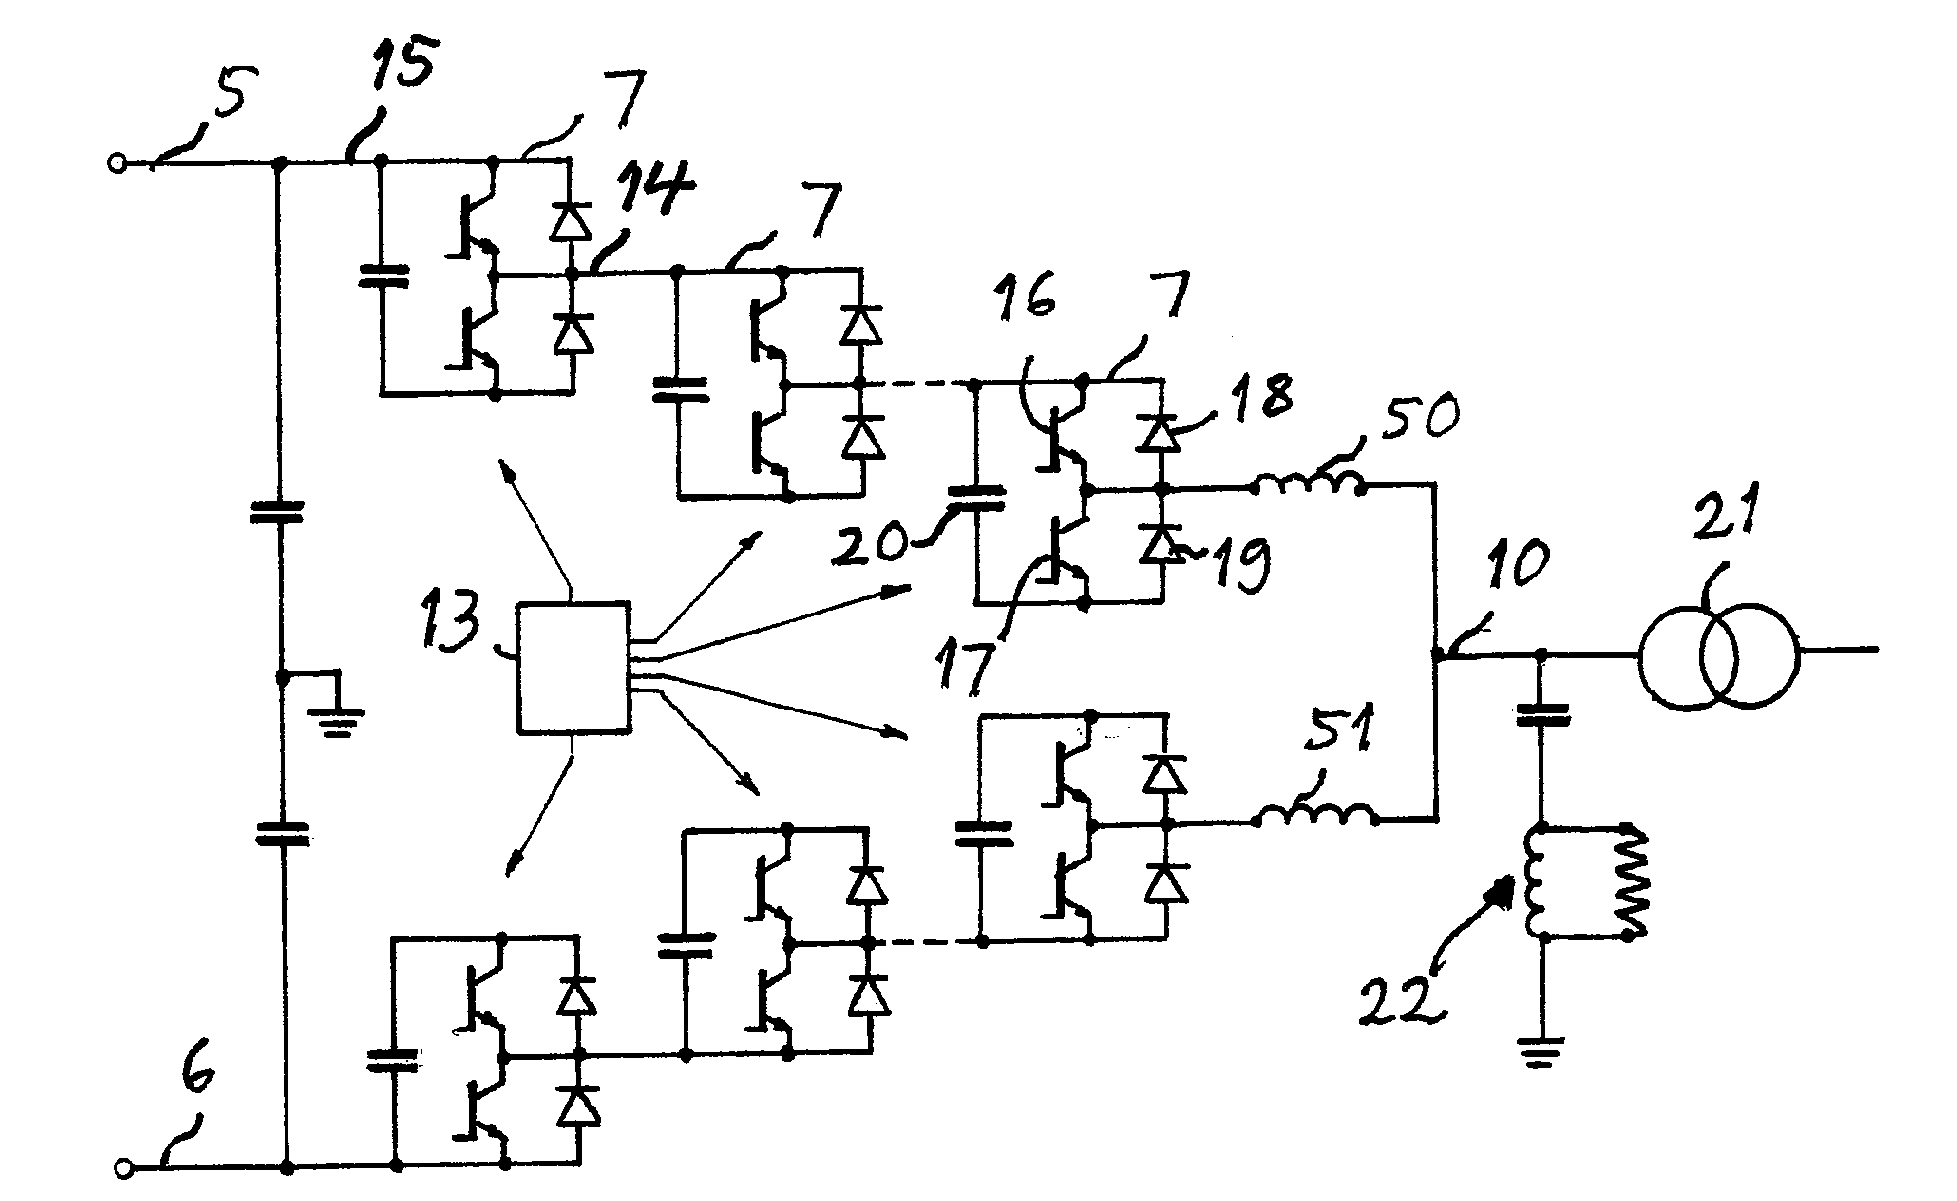 Fault protection in voltage source converters with redundant switching cells via mechanical switches being closed pyrotechnically